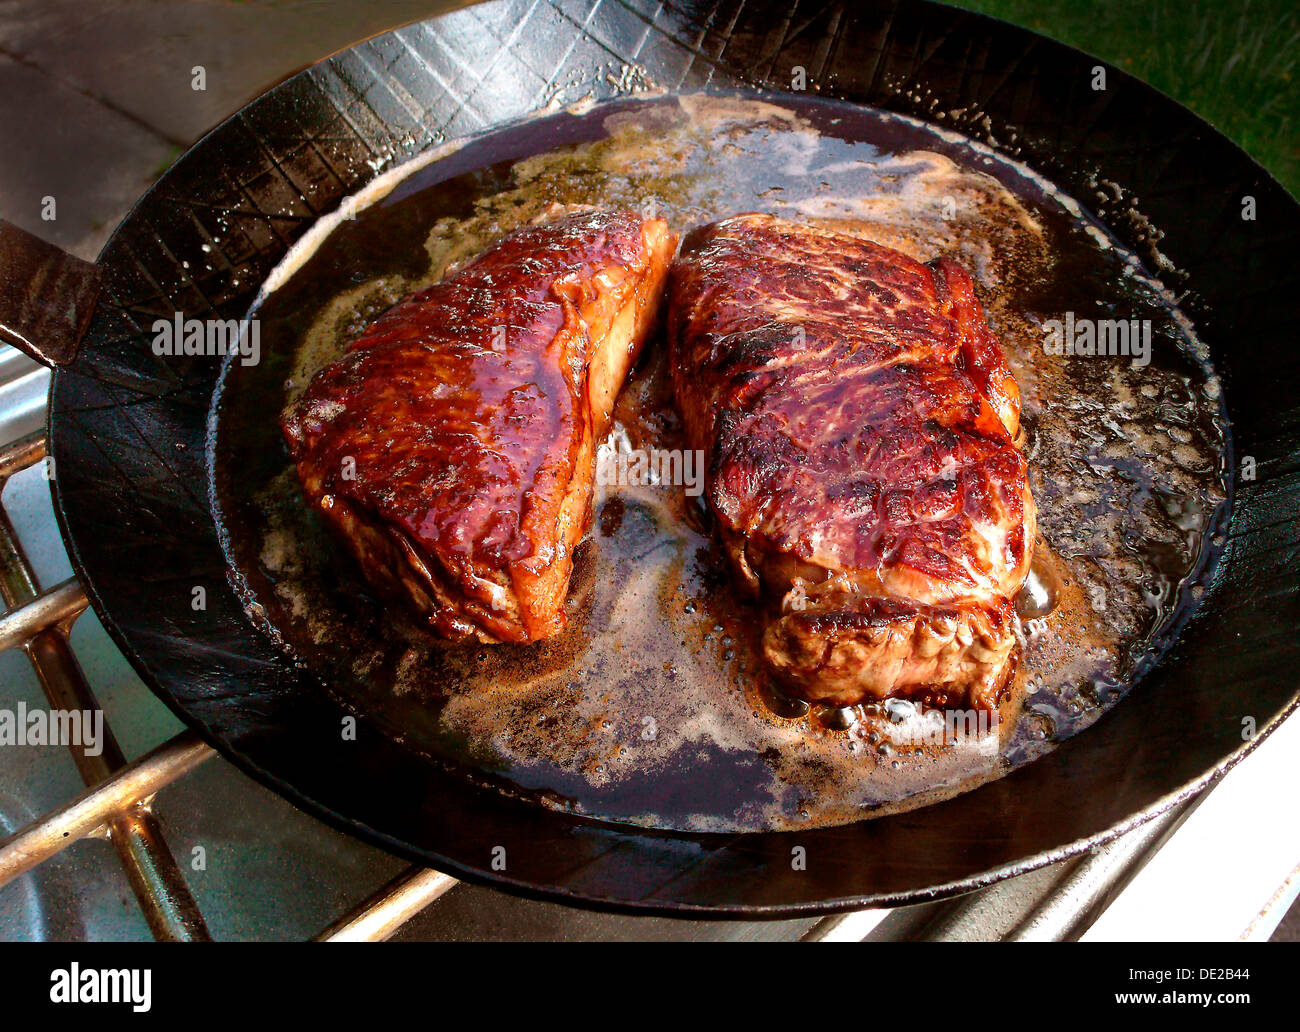 Fried steaks in a pan, Germany Stock Photo